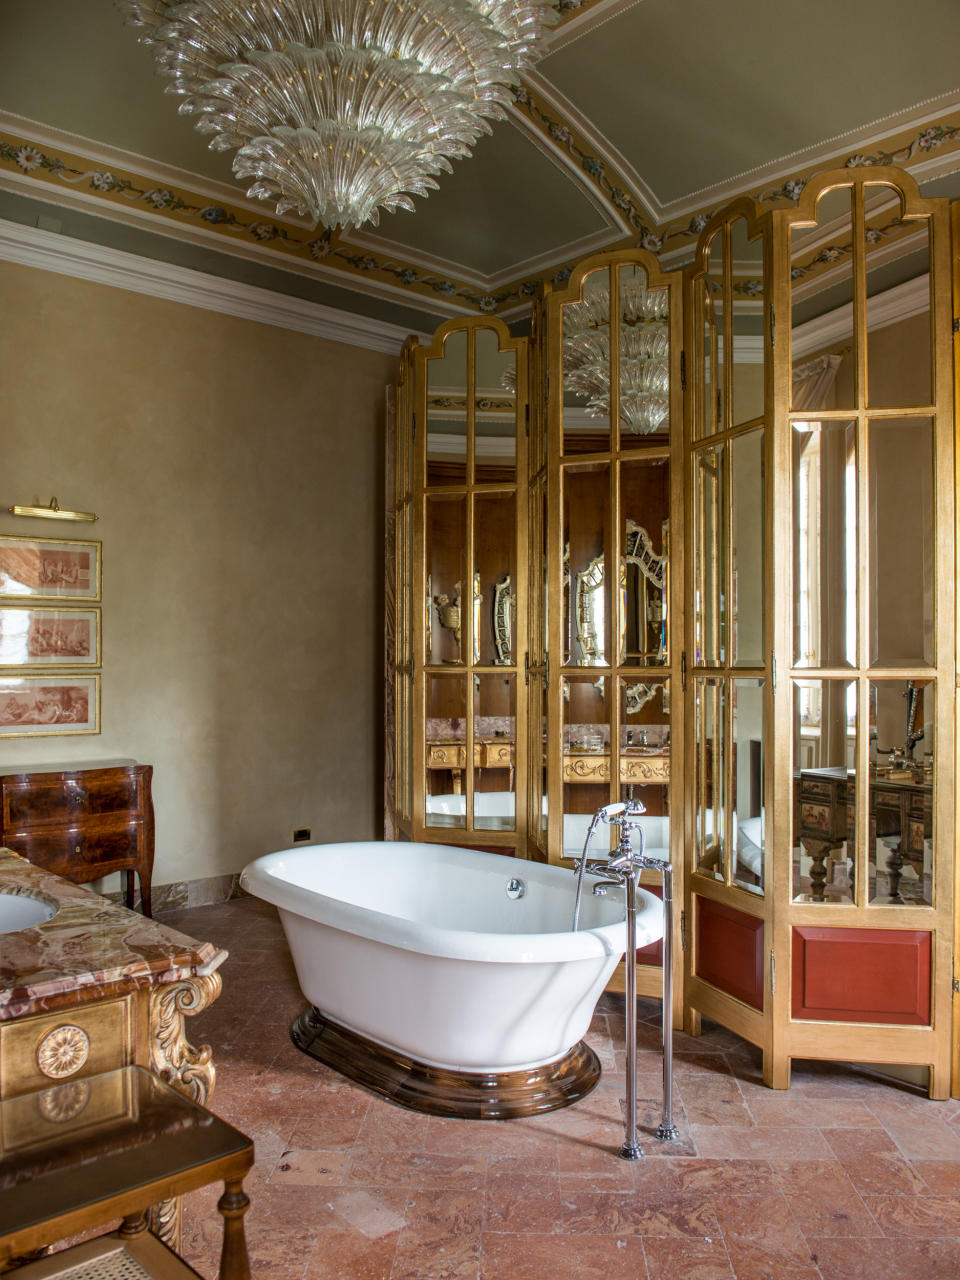 Details of the Bellini suite at Passalacqua. - Credit: Ricky Monti/Courtesy of Passalacqua